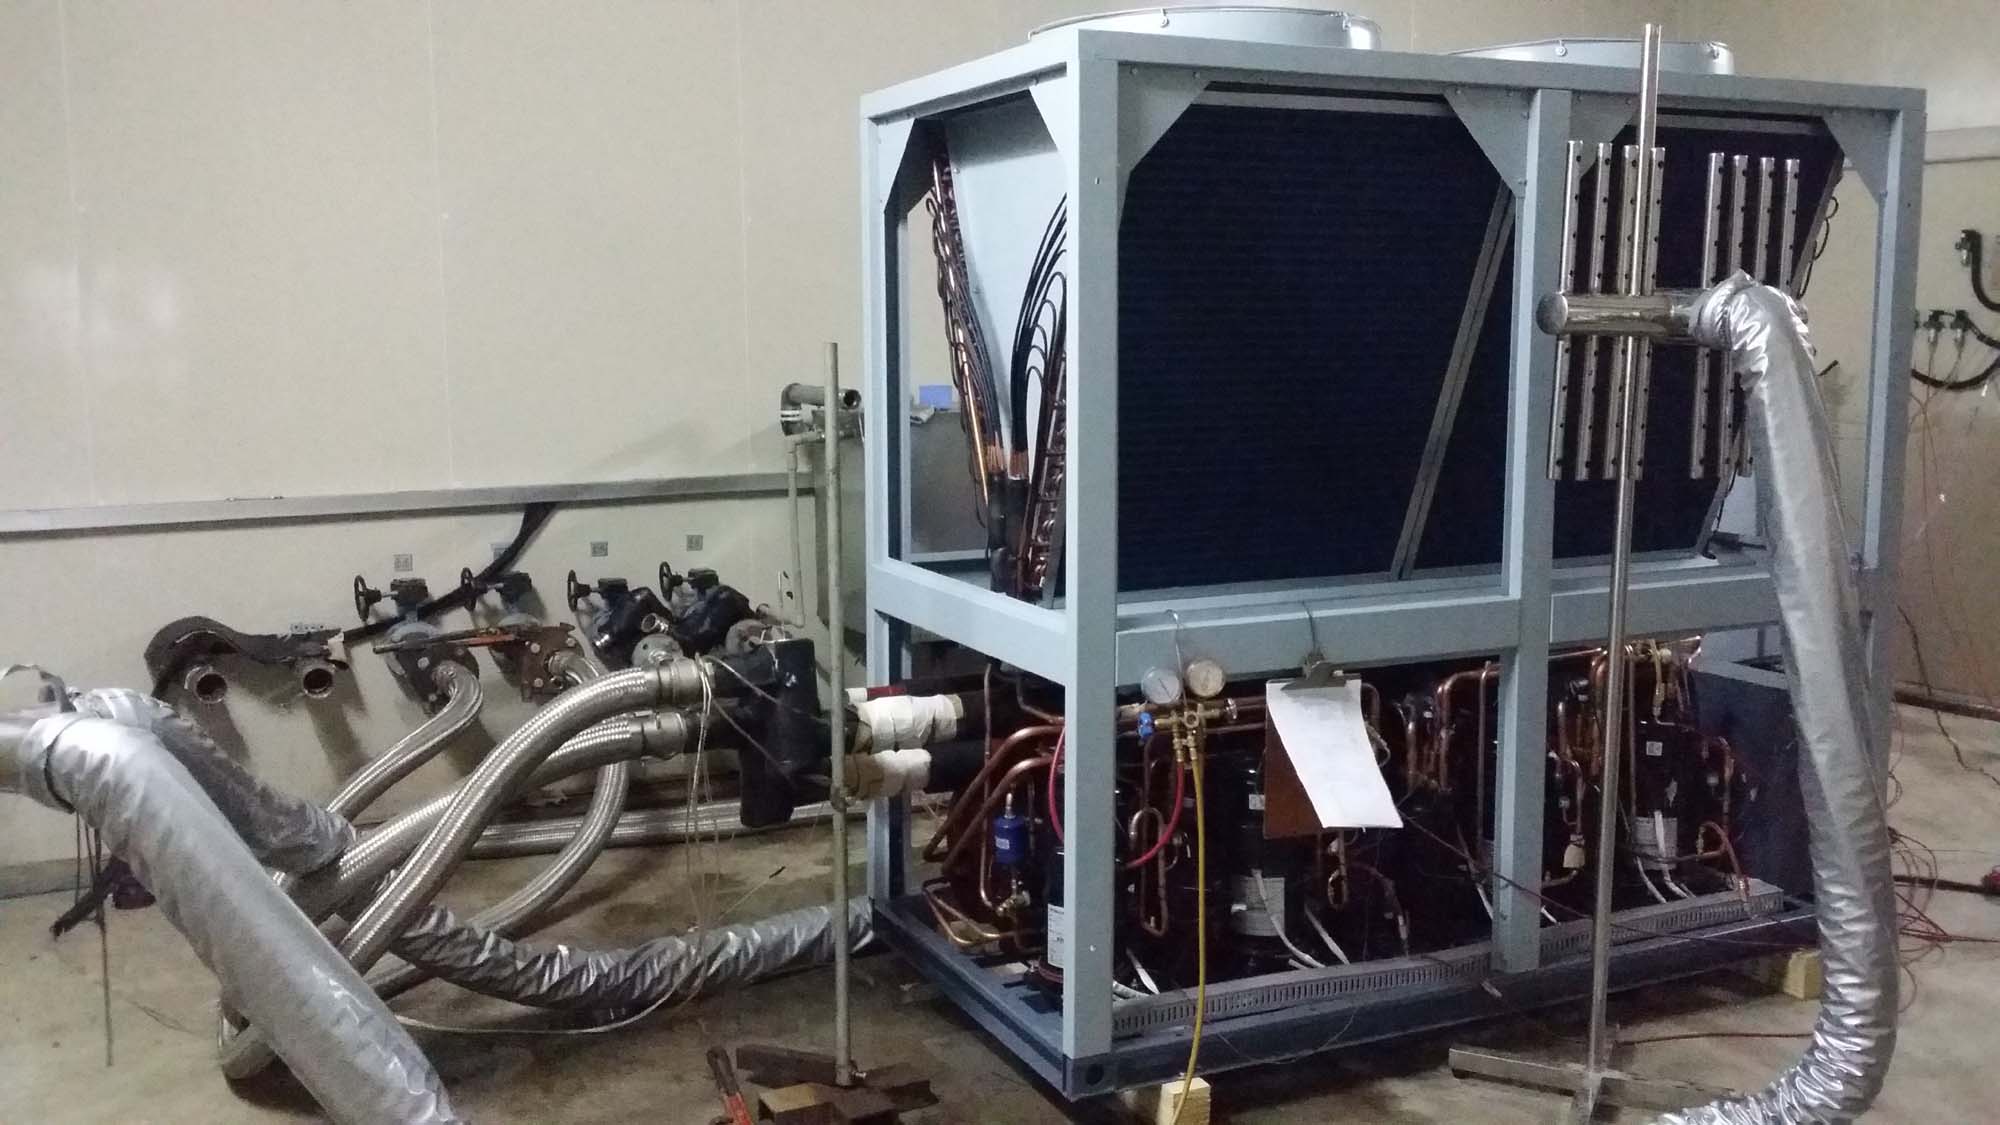 Modular Air-Cooled Water Chiller with Heat Recovery